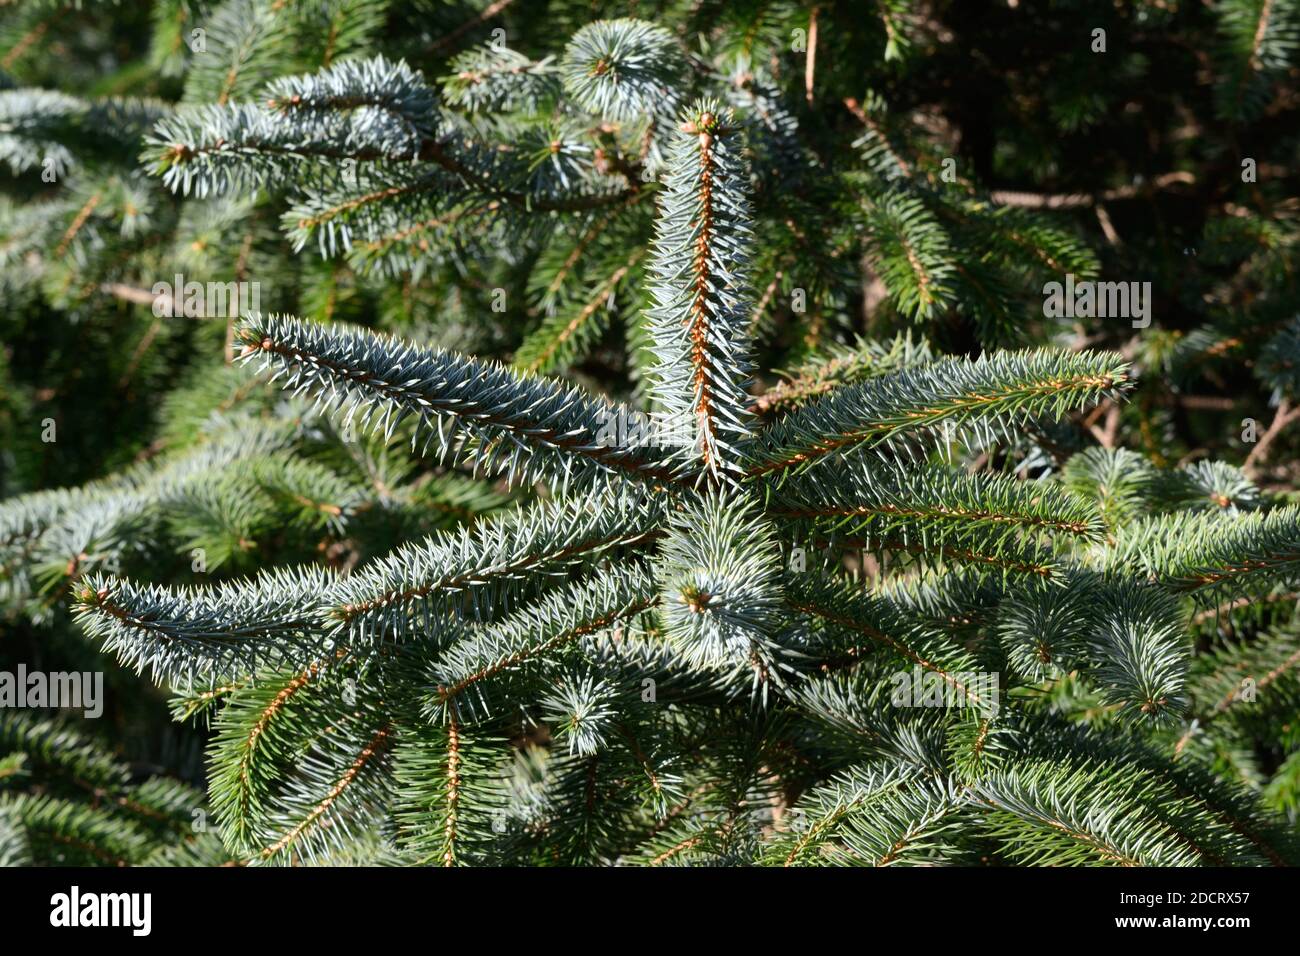 Blue green leaves needles of the Sitka Spruce Picea sitchensis conifer tree Stock Photo